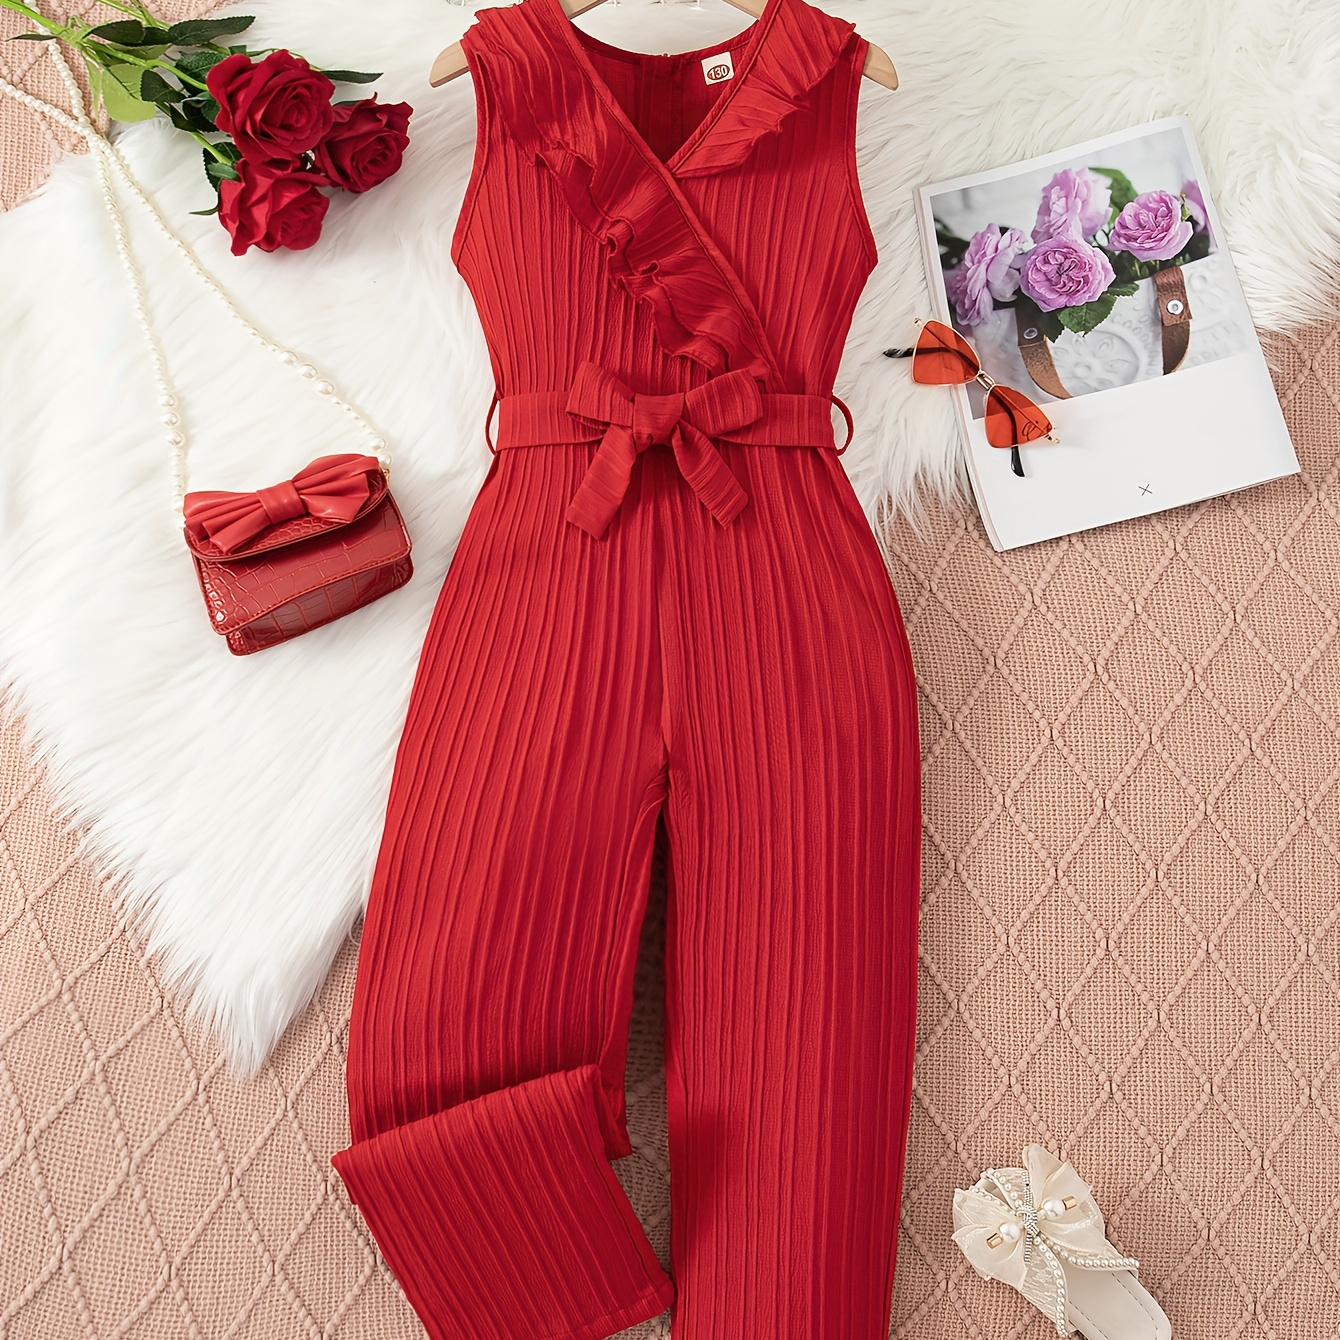 

Girls Versatile Solid Strapped Ruffle Trim Jumpsuit, Casual Sleeveless Romper For Summer Holiday Party Gift